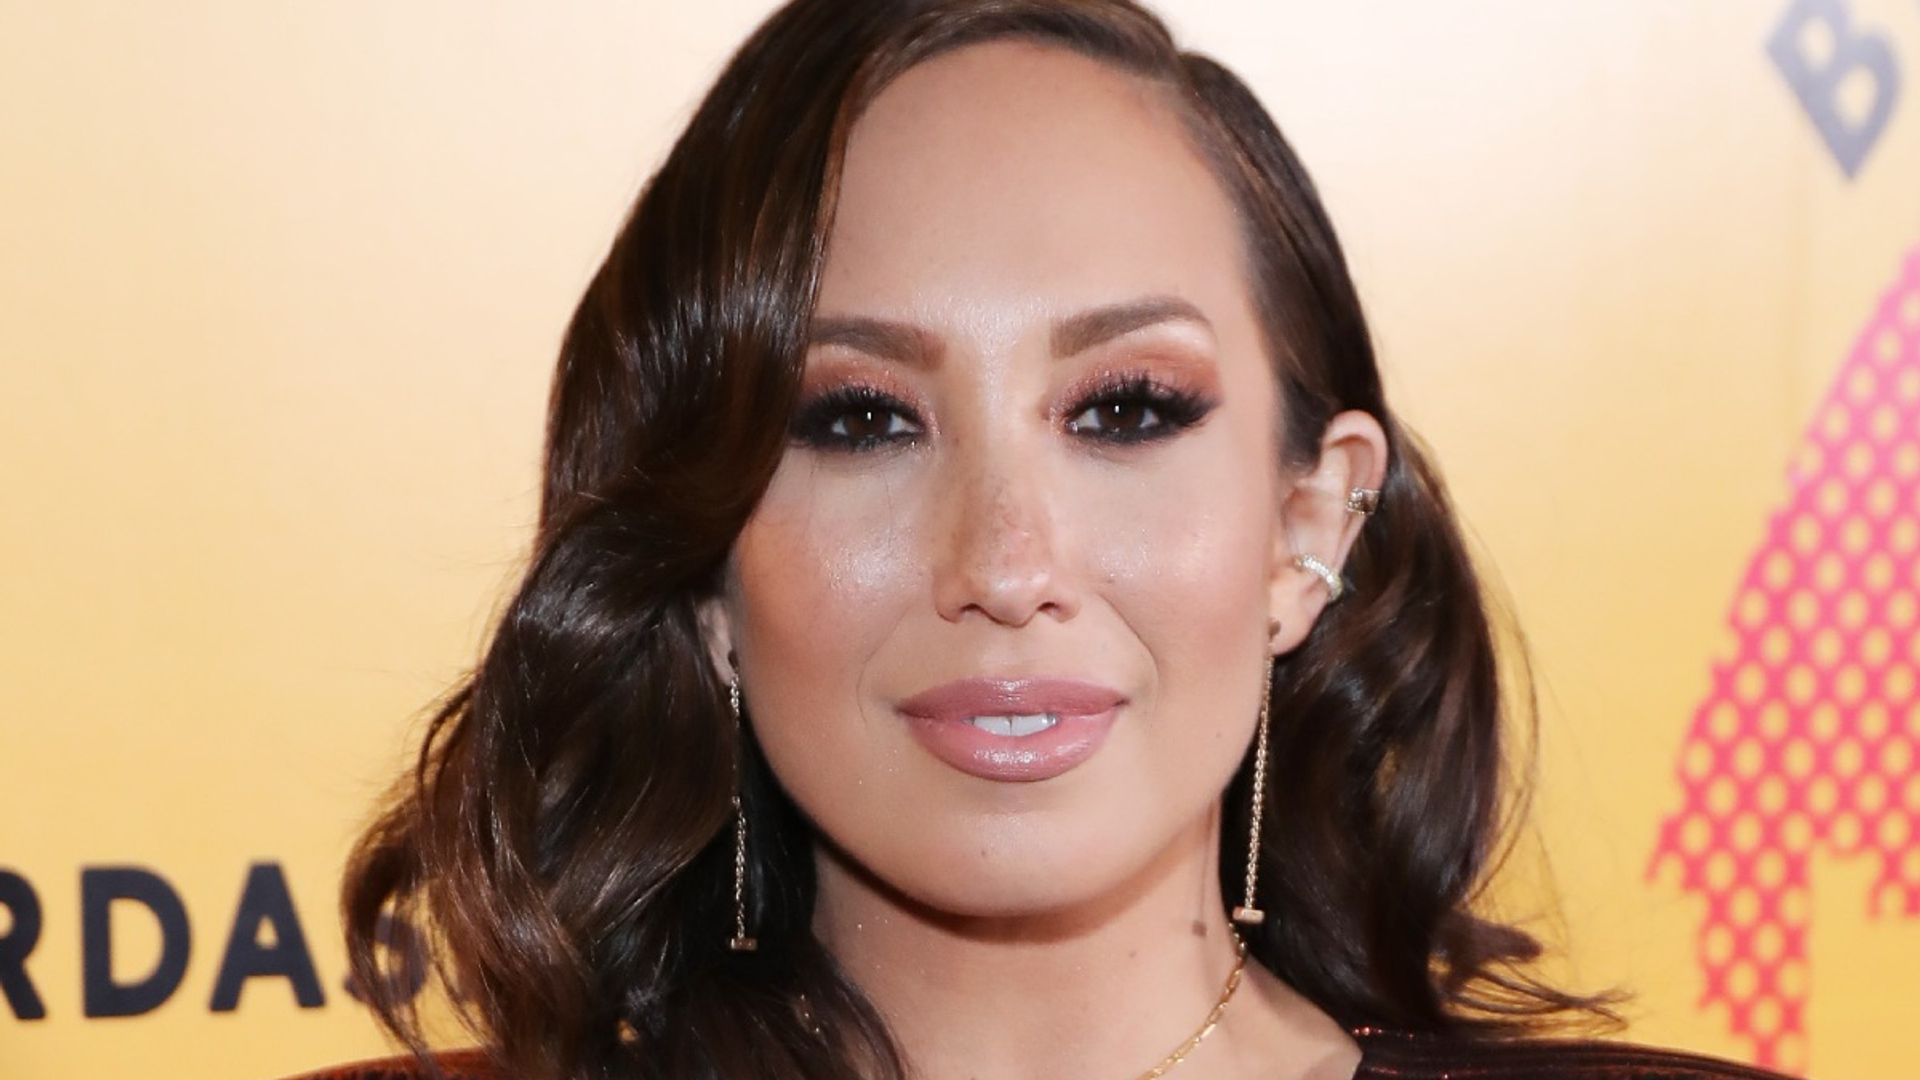 Dancing with the Stars' Cheryl Burke praised by fans as she shares risque picture